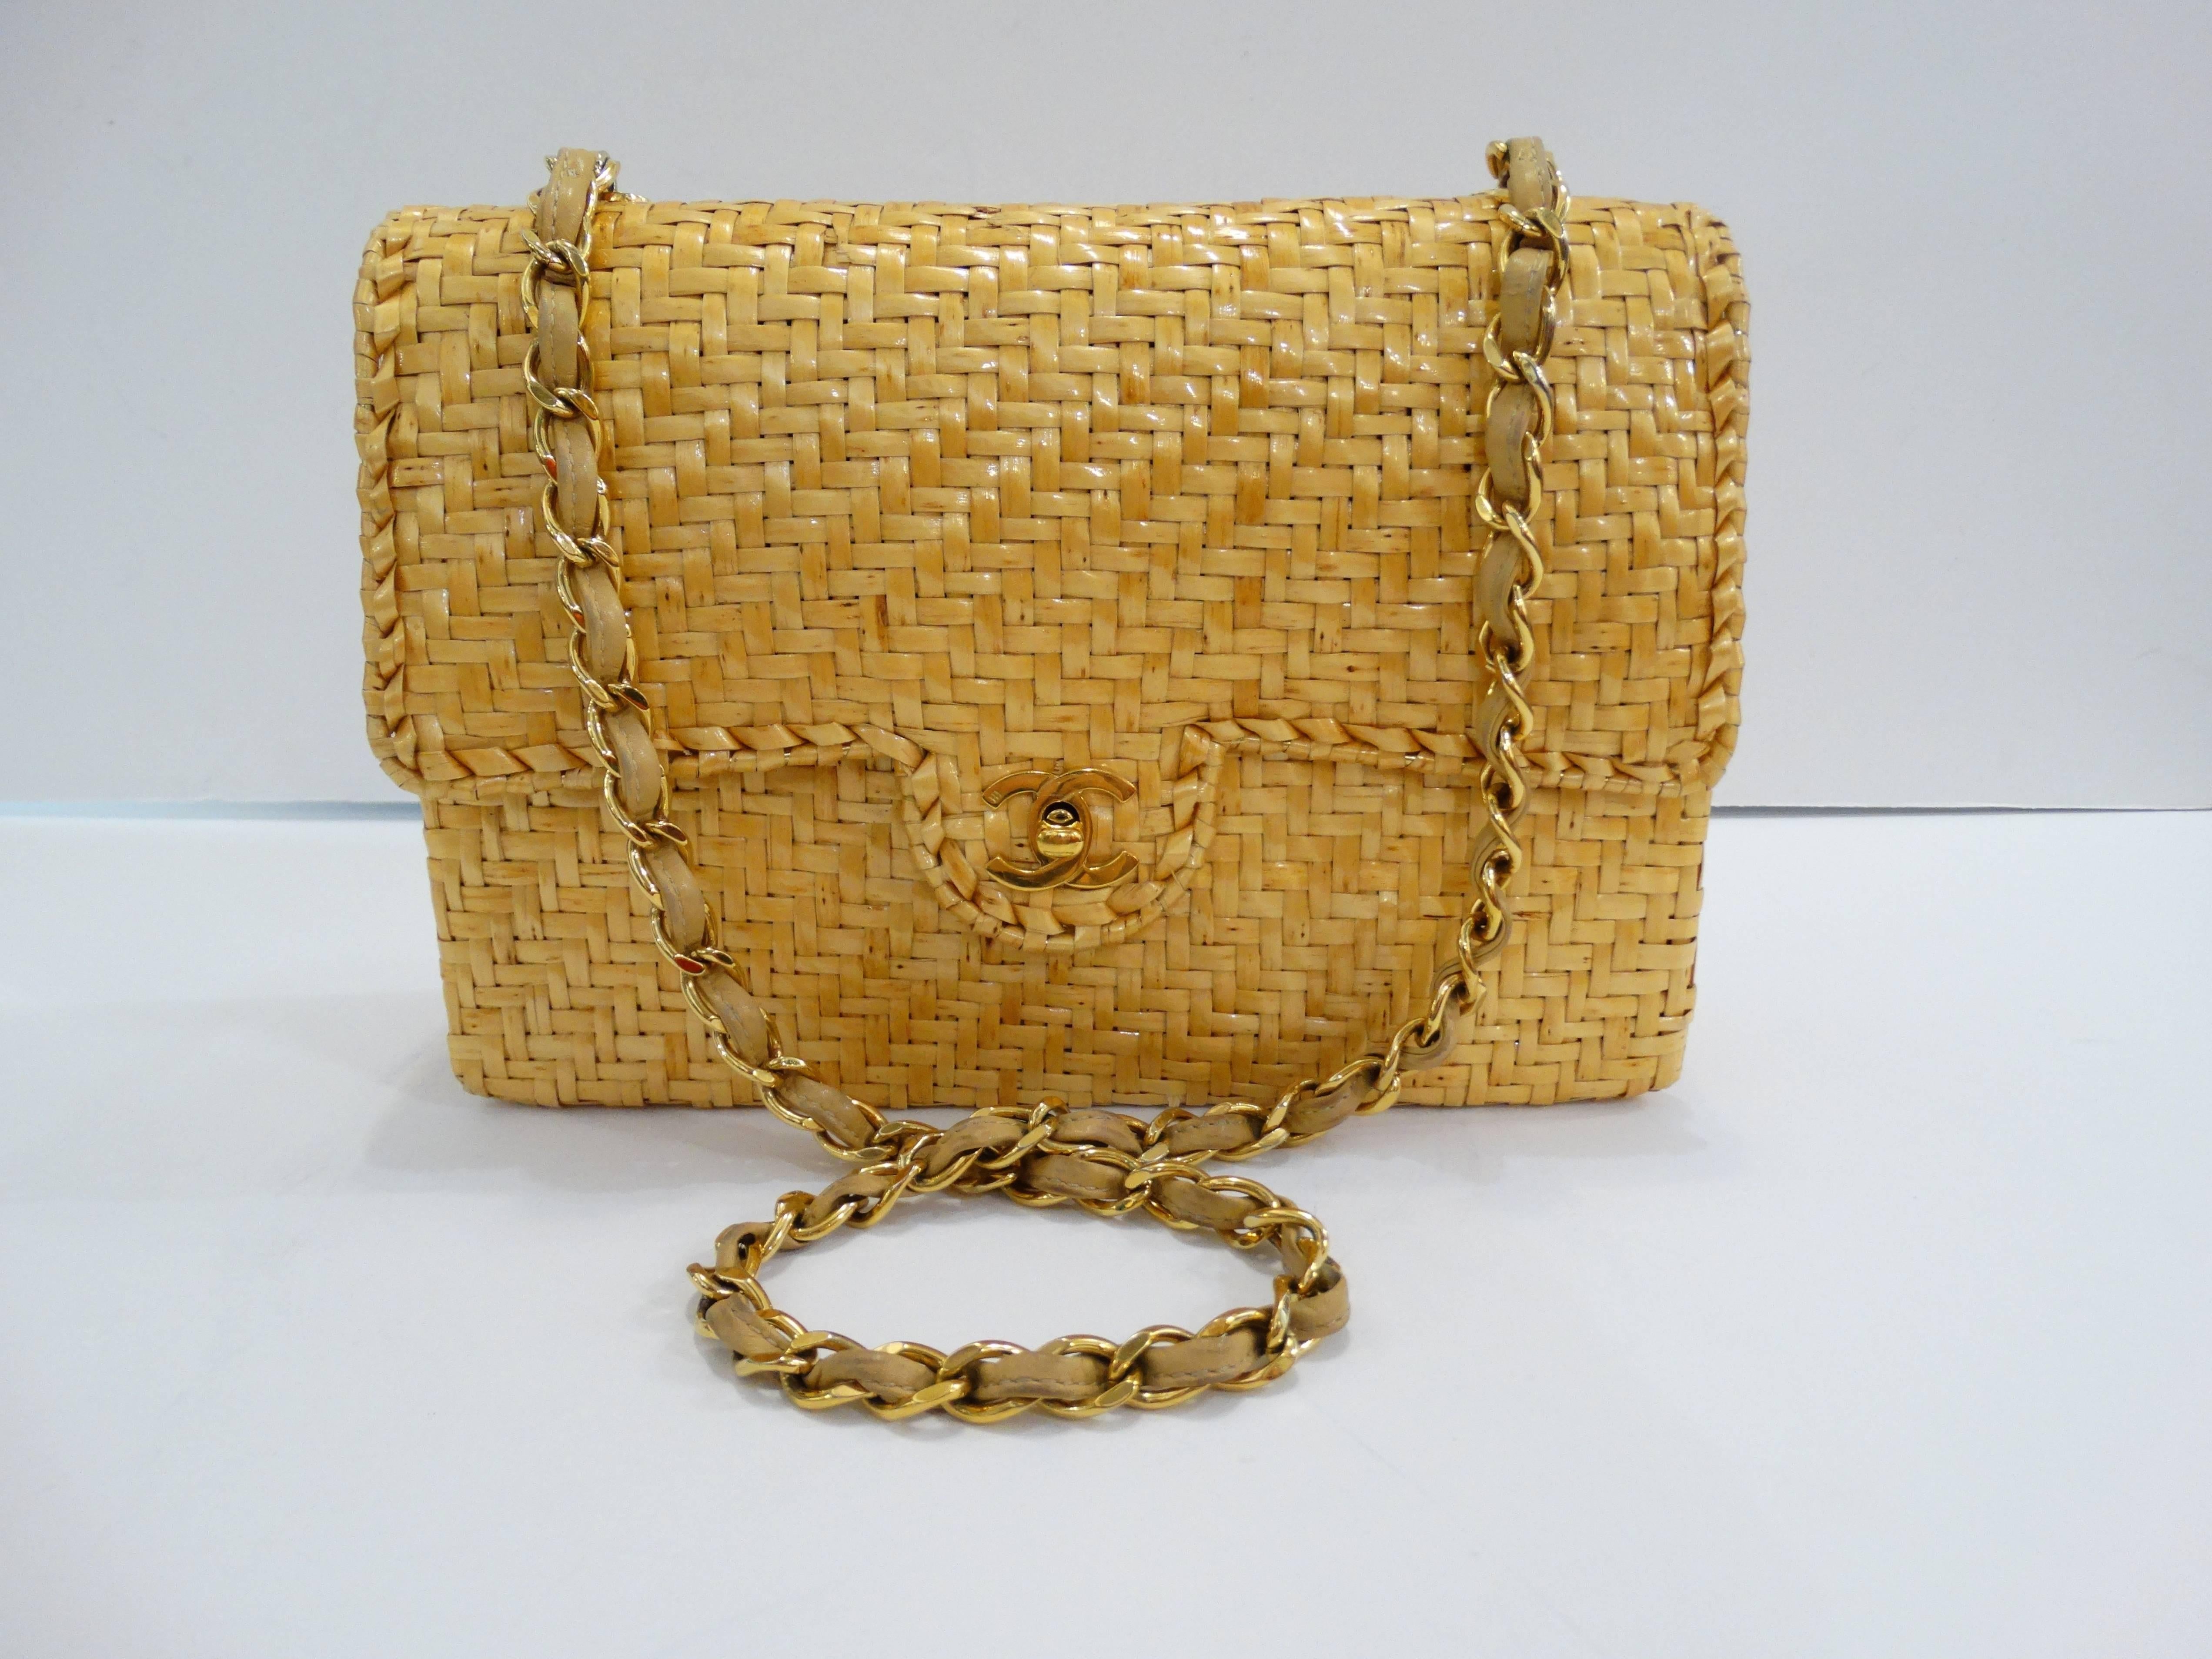 Get in on the wicker bag trend with this amazing Chanel piece! Made of woven rattan wicker in the classic 2.55 rectangular shape with flap closure. Turn-key CC logo clasp in a brilliant gold metal that matches the chain. Fully lined cloth interior